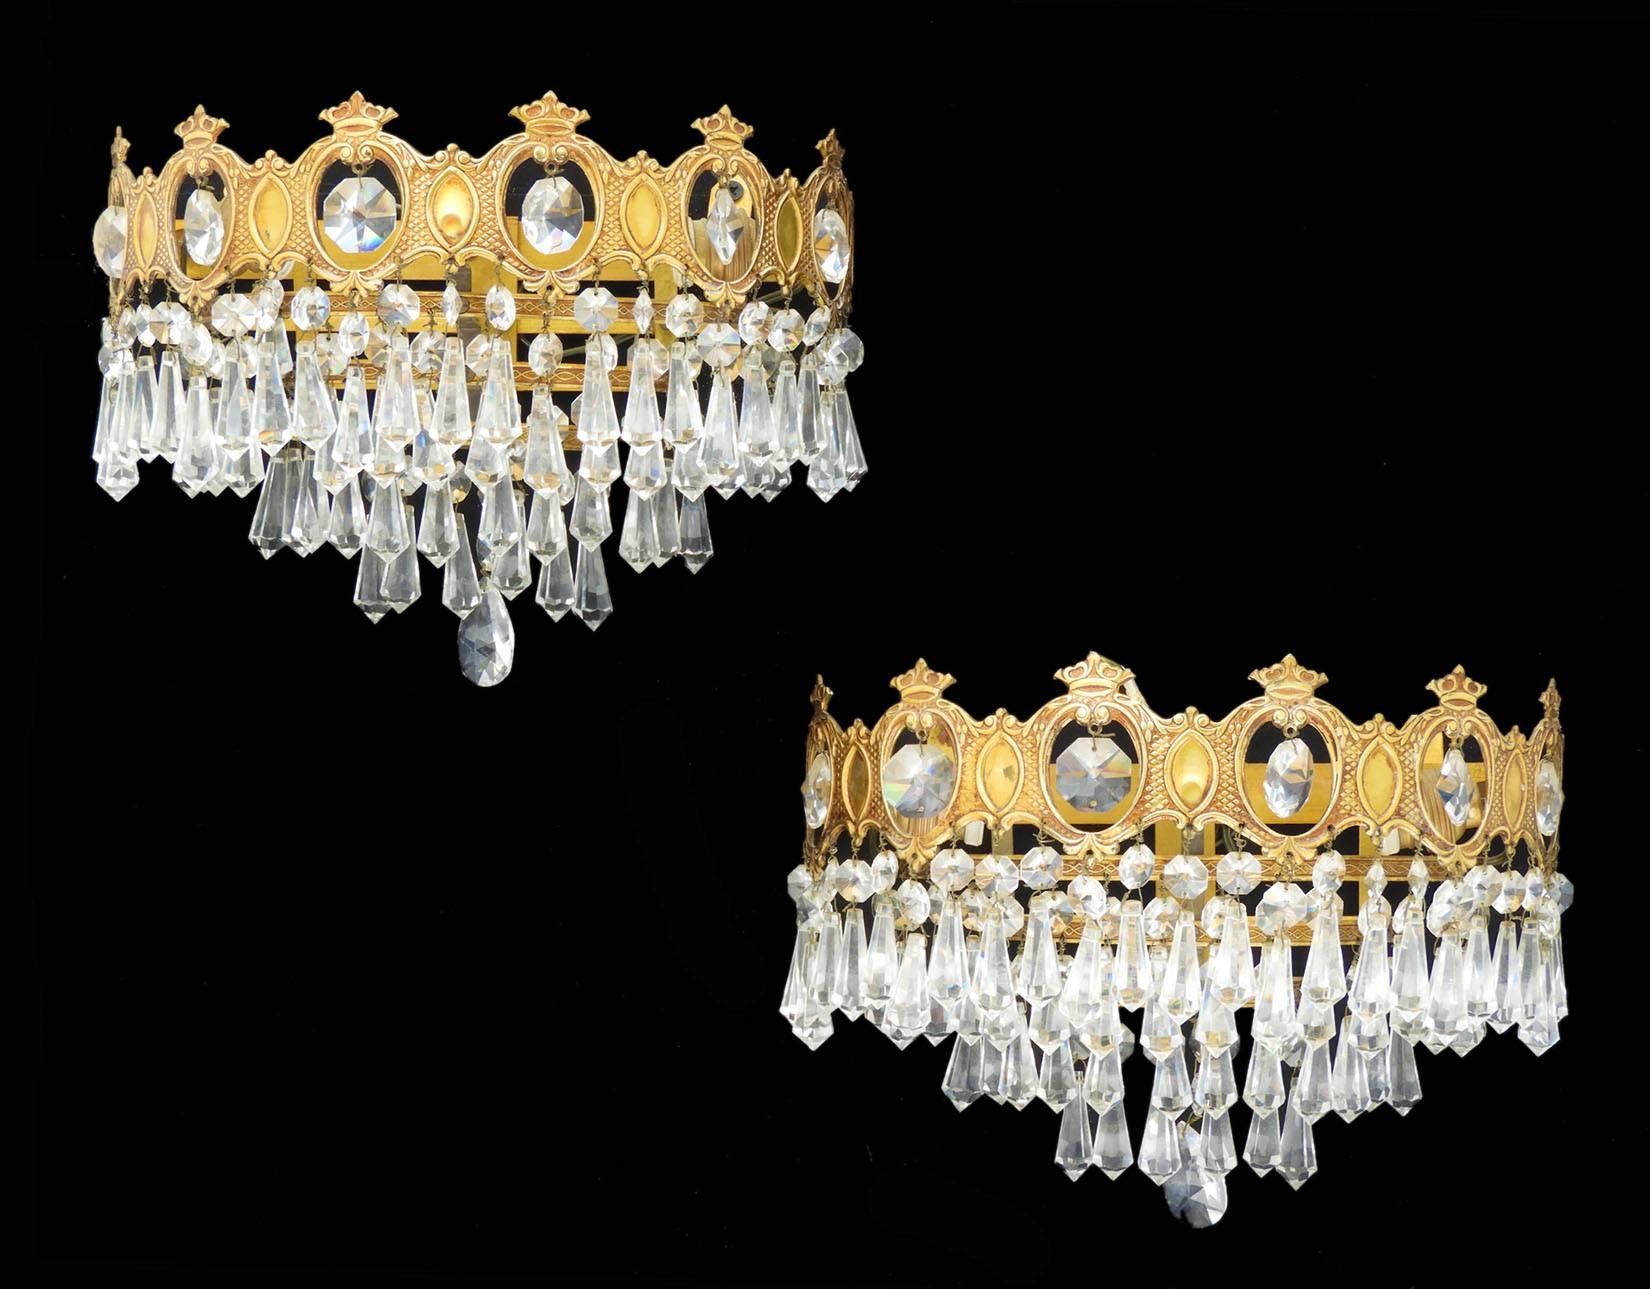 Pair of wall lights faceted cut-glass drops and brass three-tiered half crowns, circa 1920
Three tiers of faceted and prism cut-glass
Crown detailed gilded brass mount in good original condition 
No losses to glass
These will be re-wired and